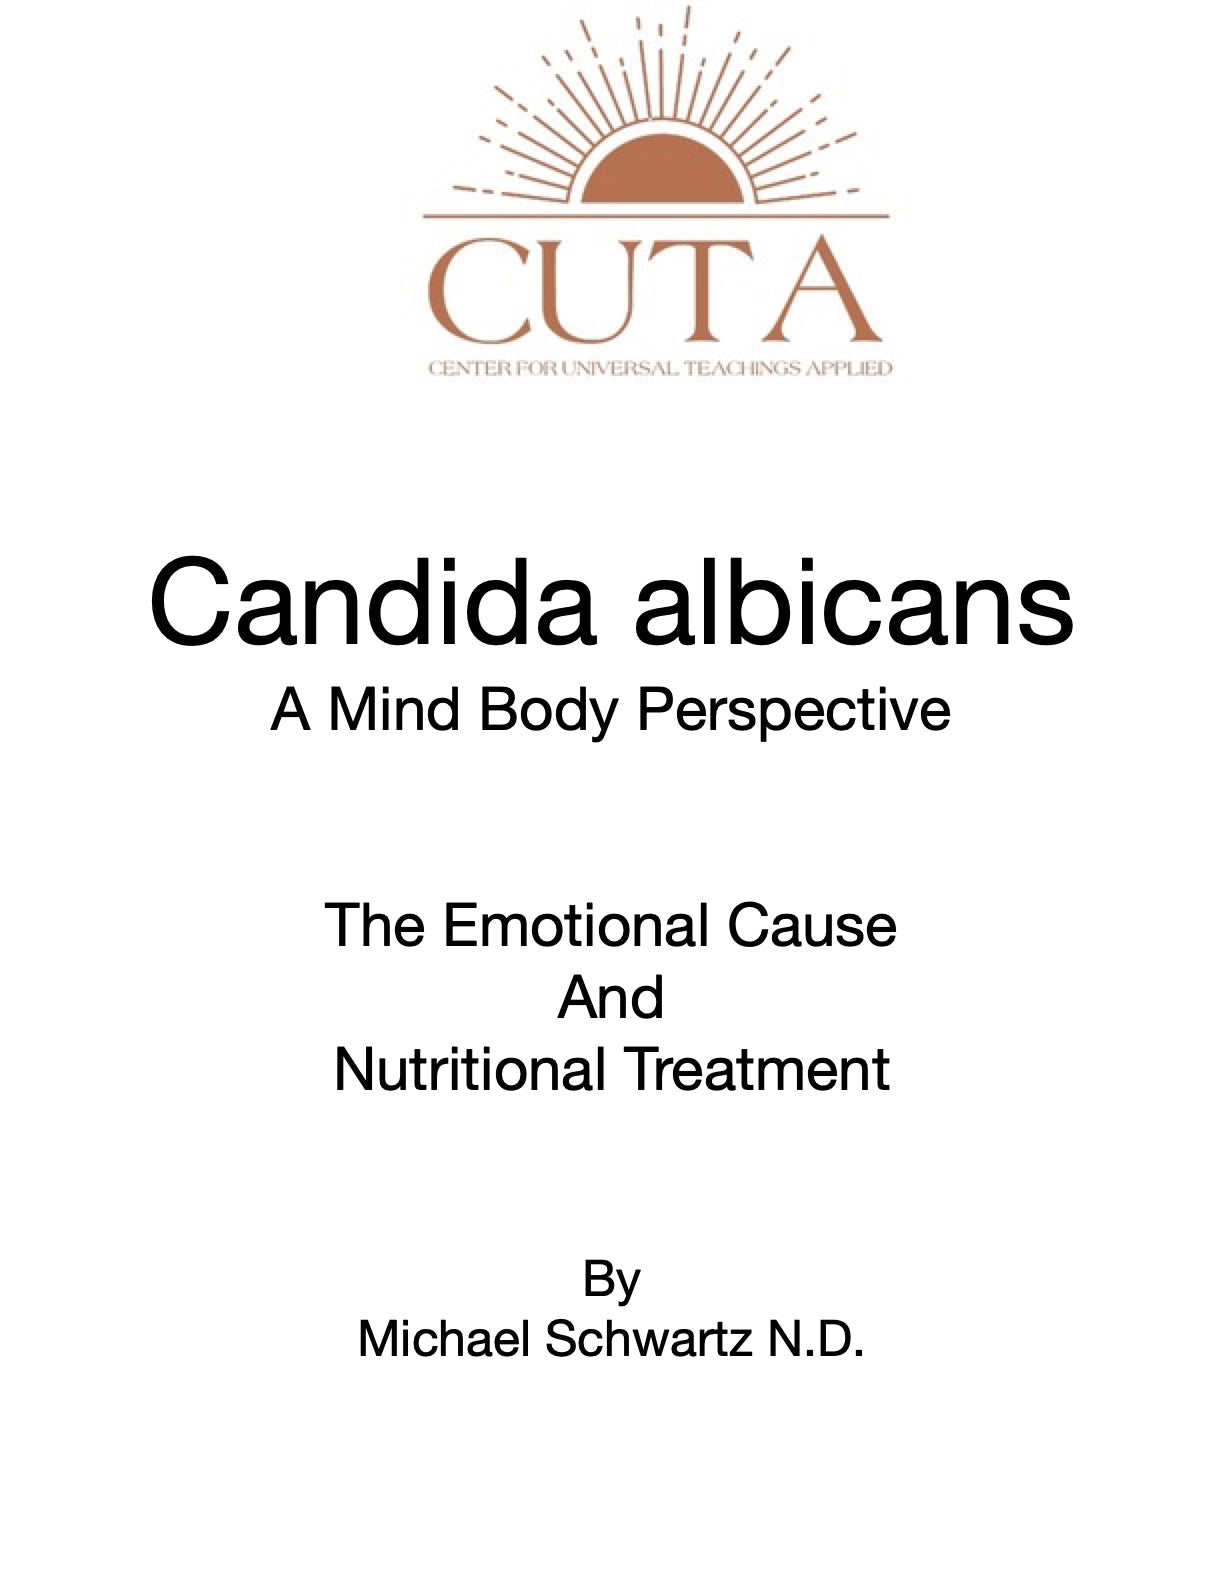 Candida albicans Booklet